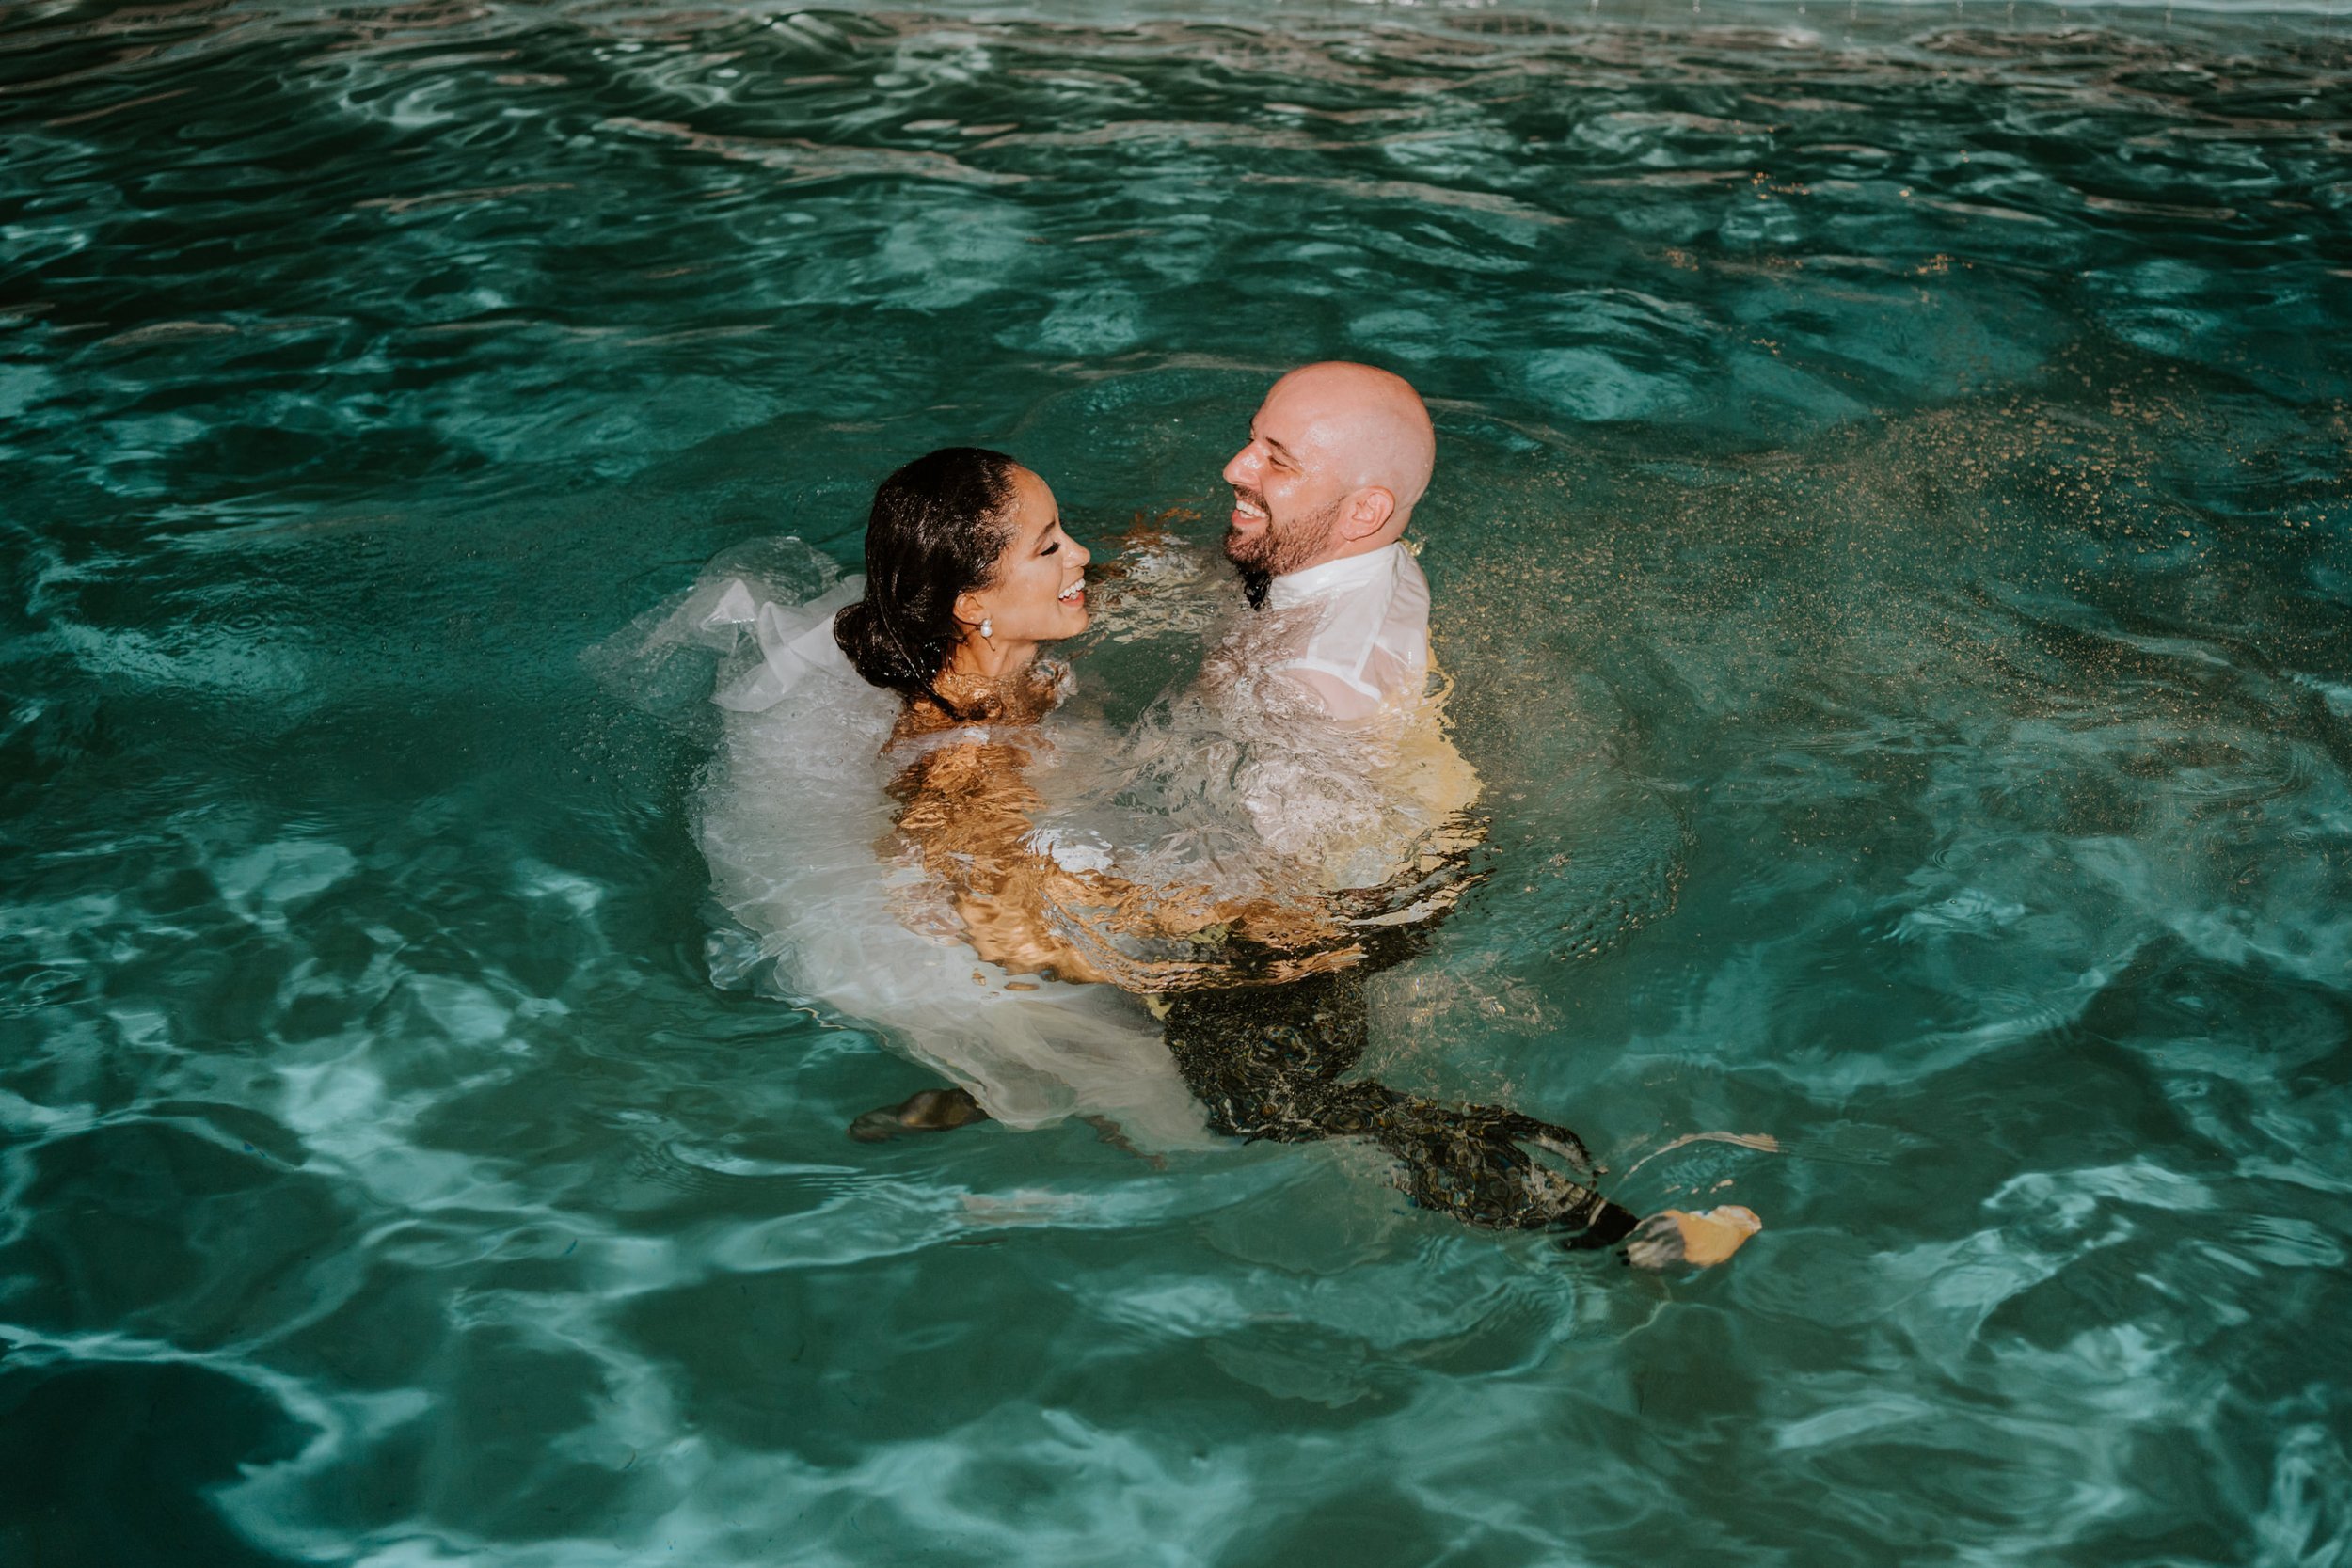 holiday house palm springs elopement photography by tida svy-83.jpg